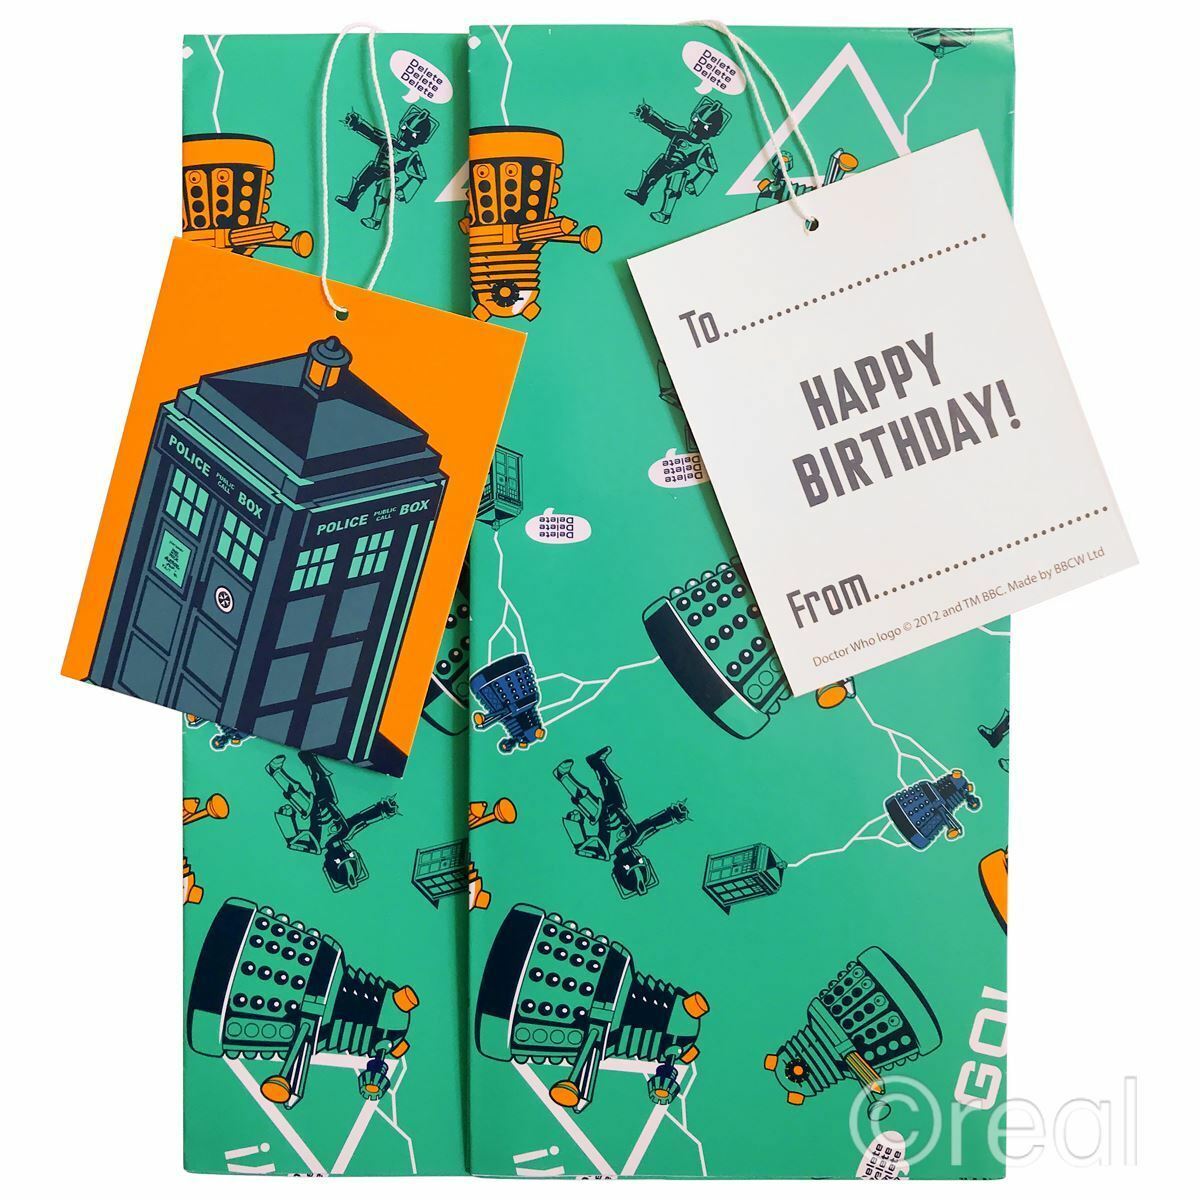 3 DOCTOR WHO GIFT WRAP SETS Birthday Tags Wrapping Paper TARDIS Official